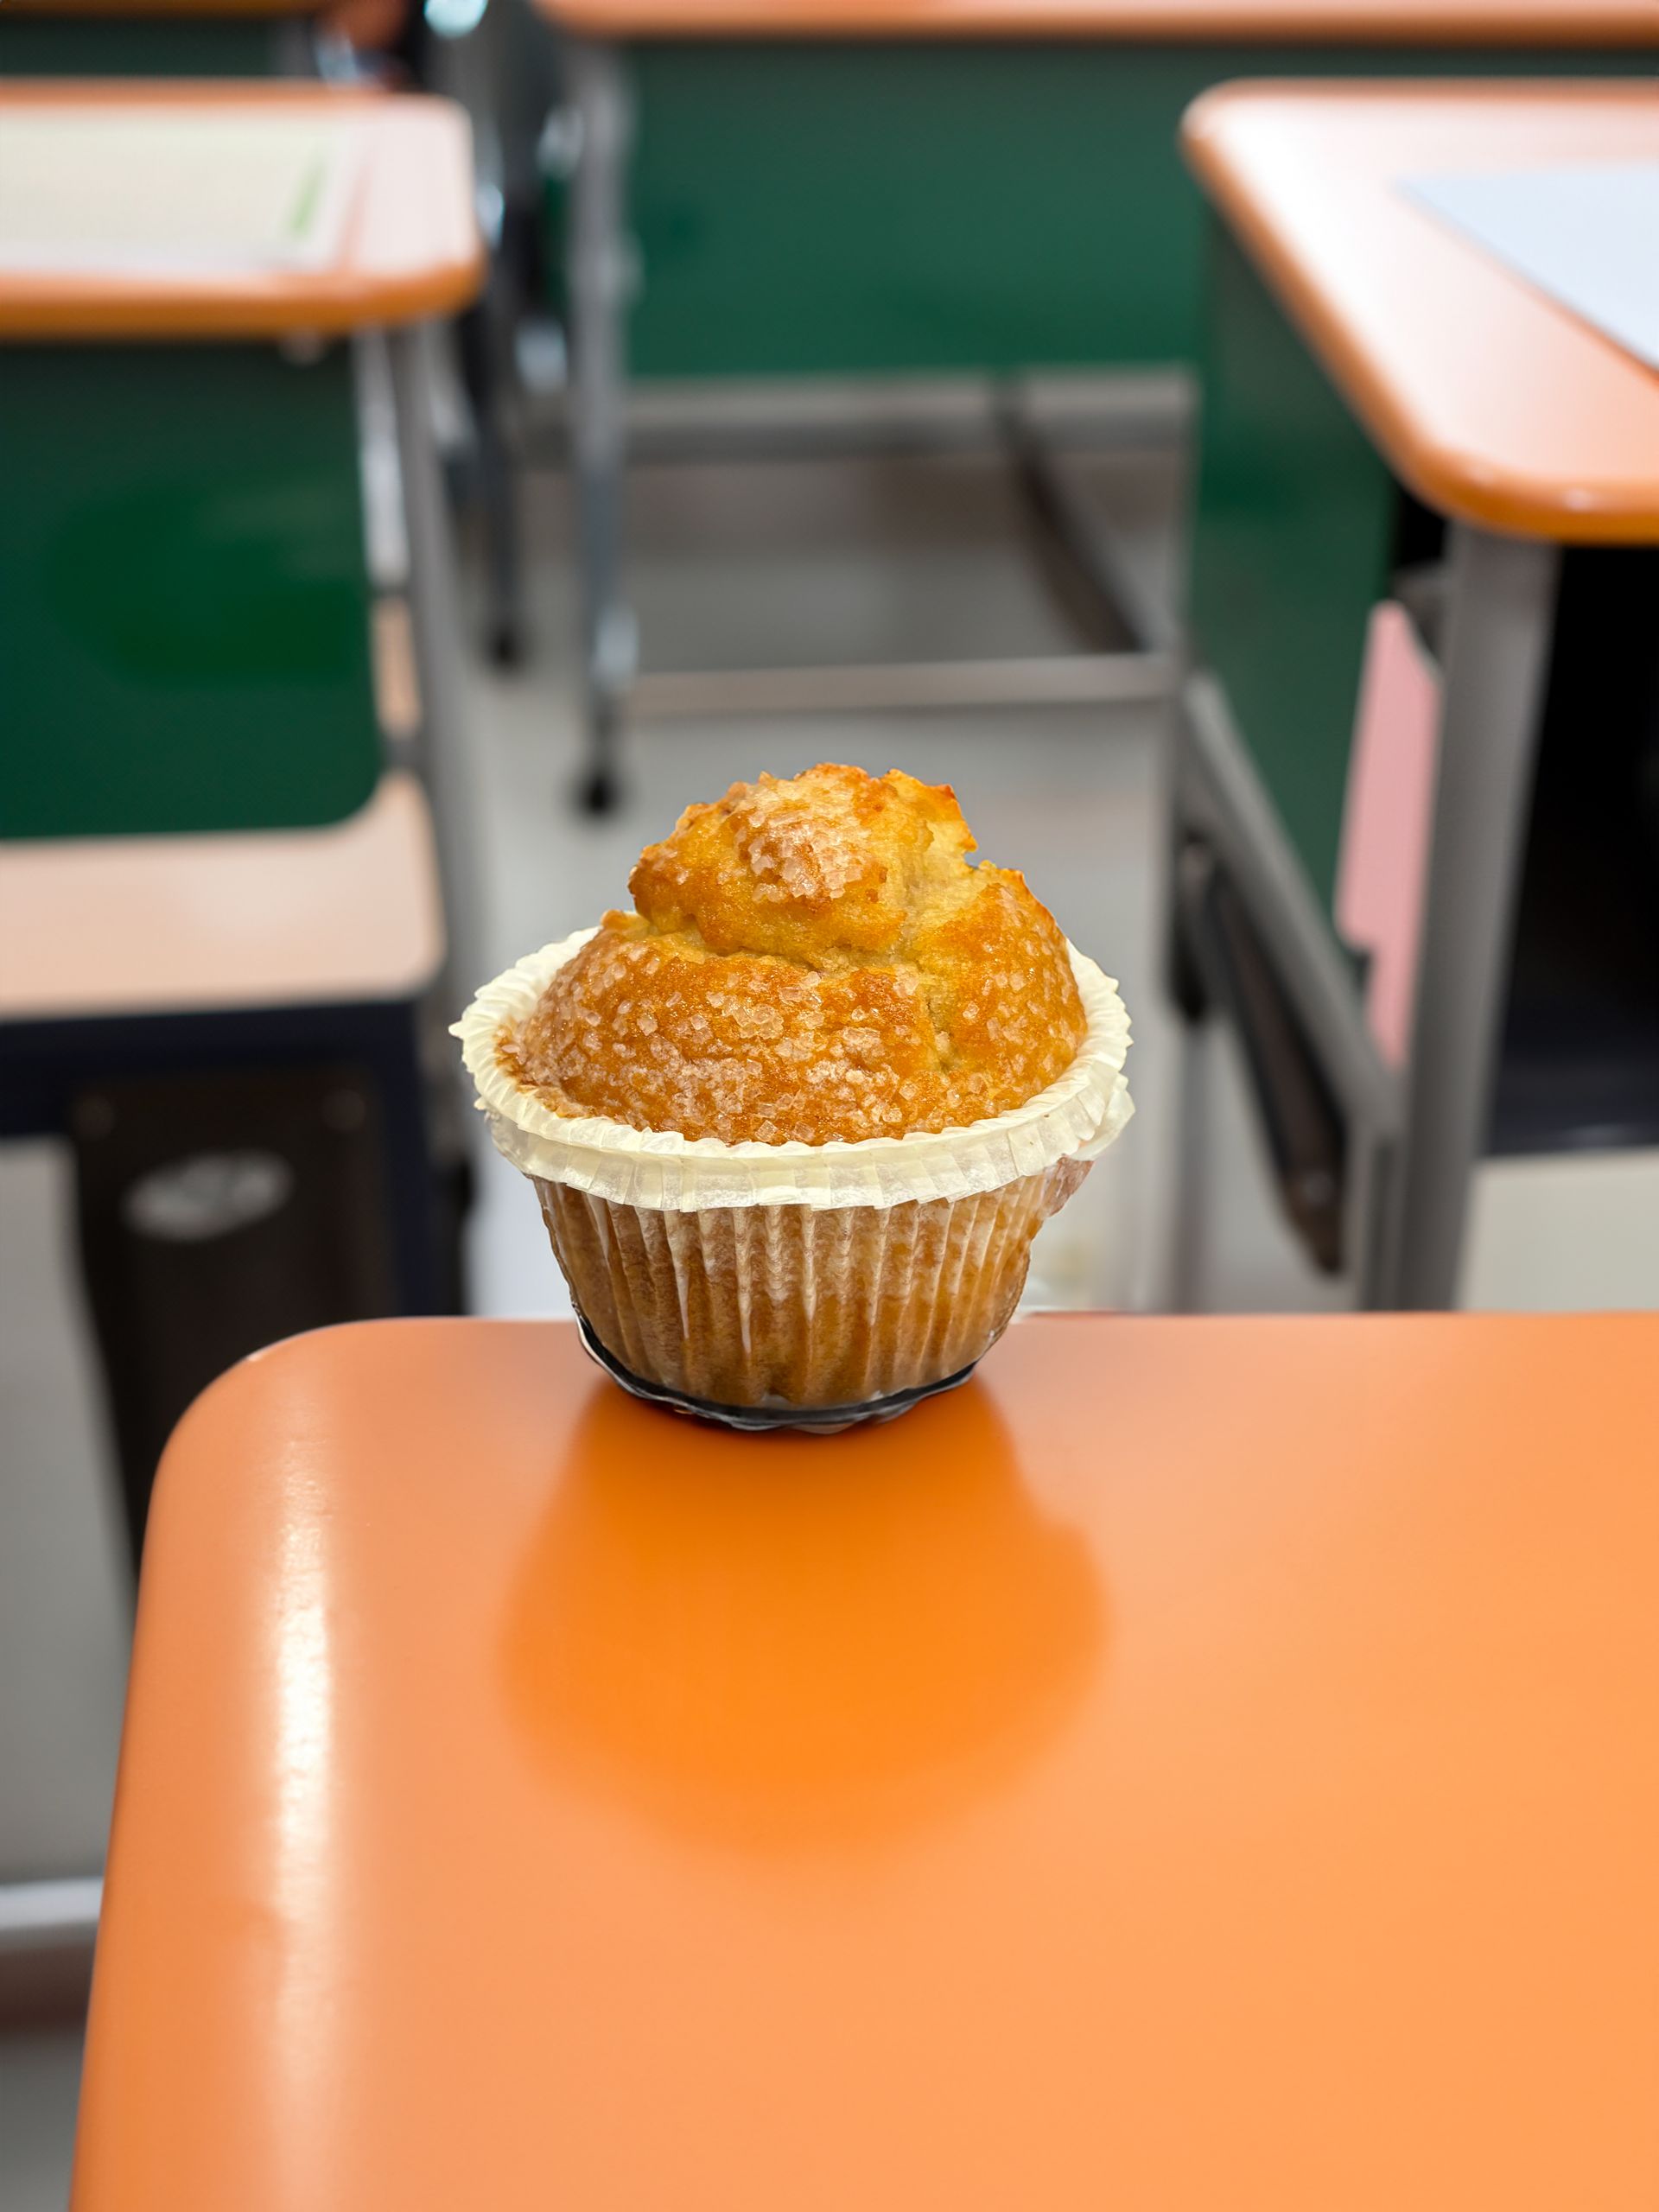 Muffin in Classroom Image